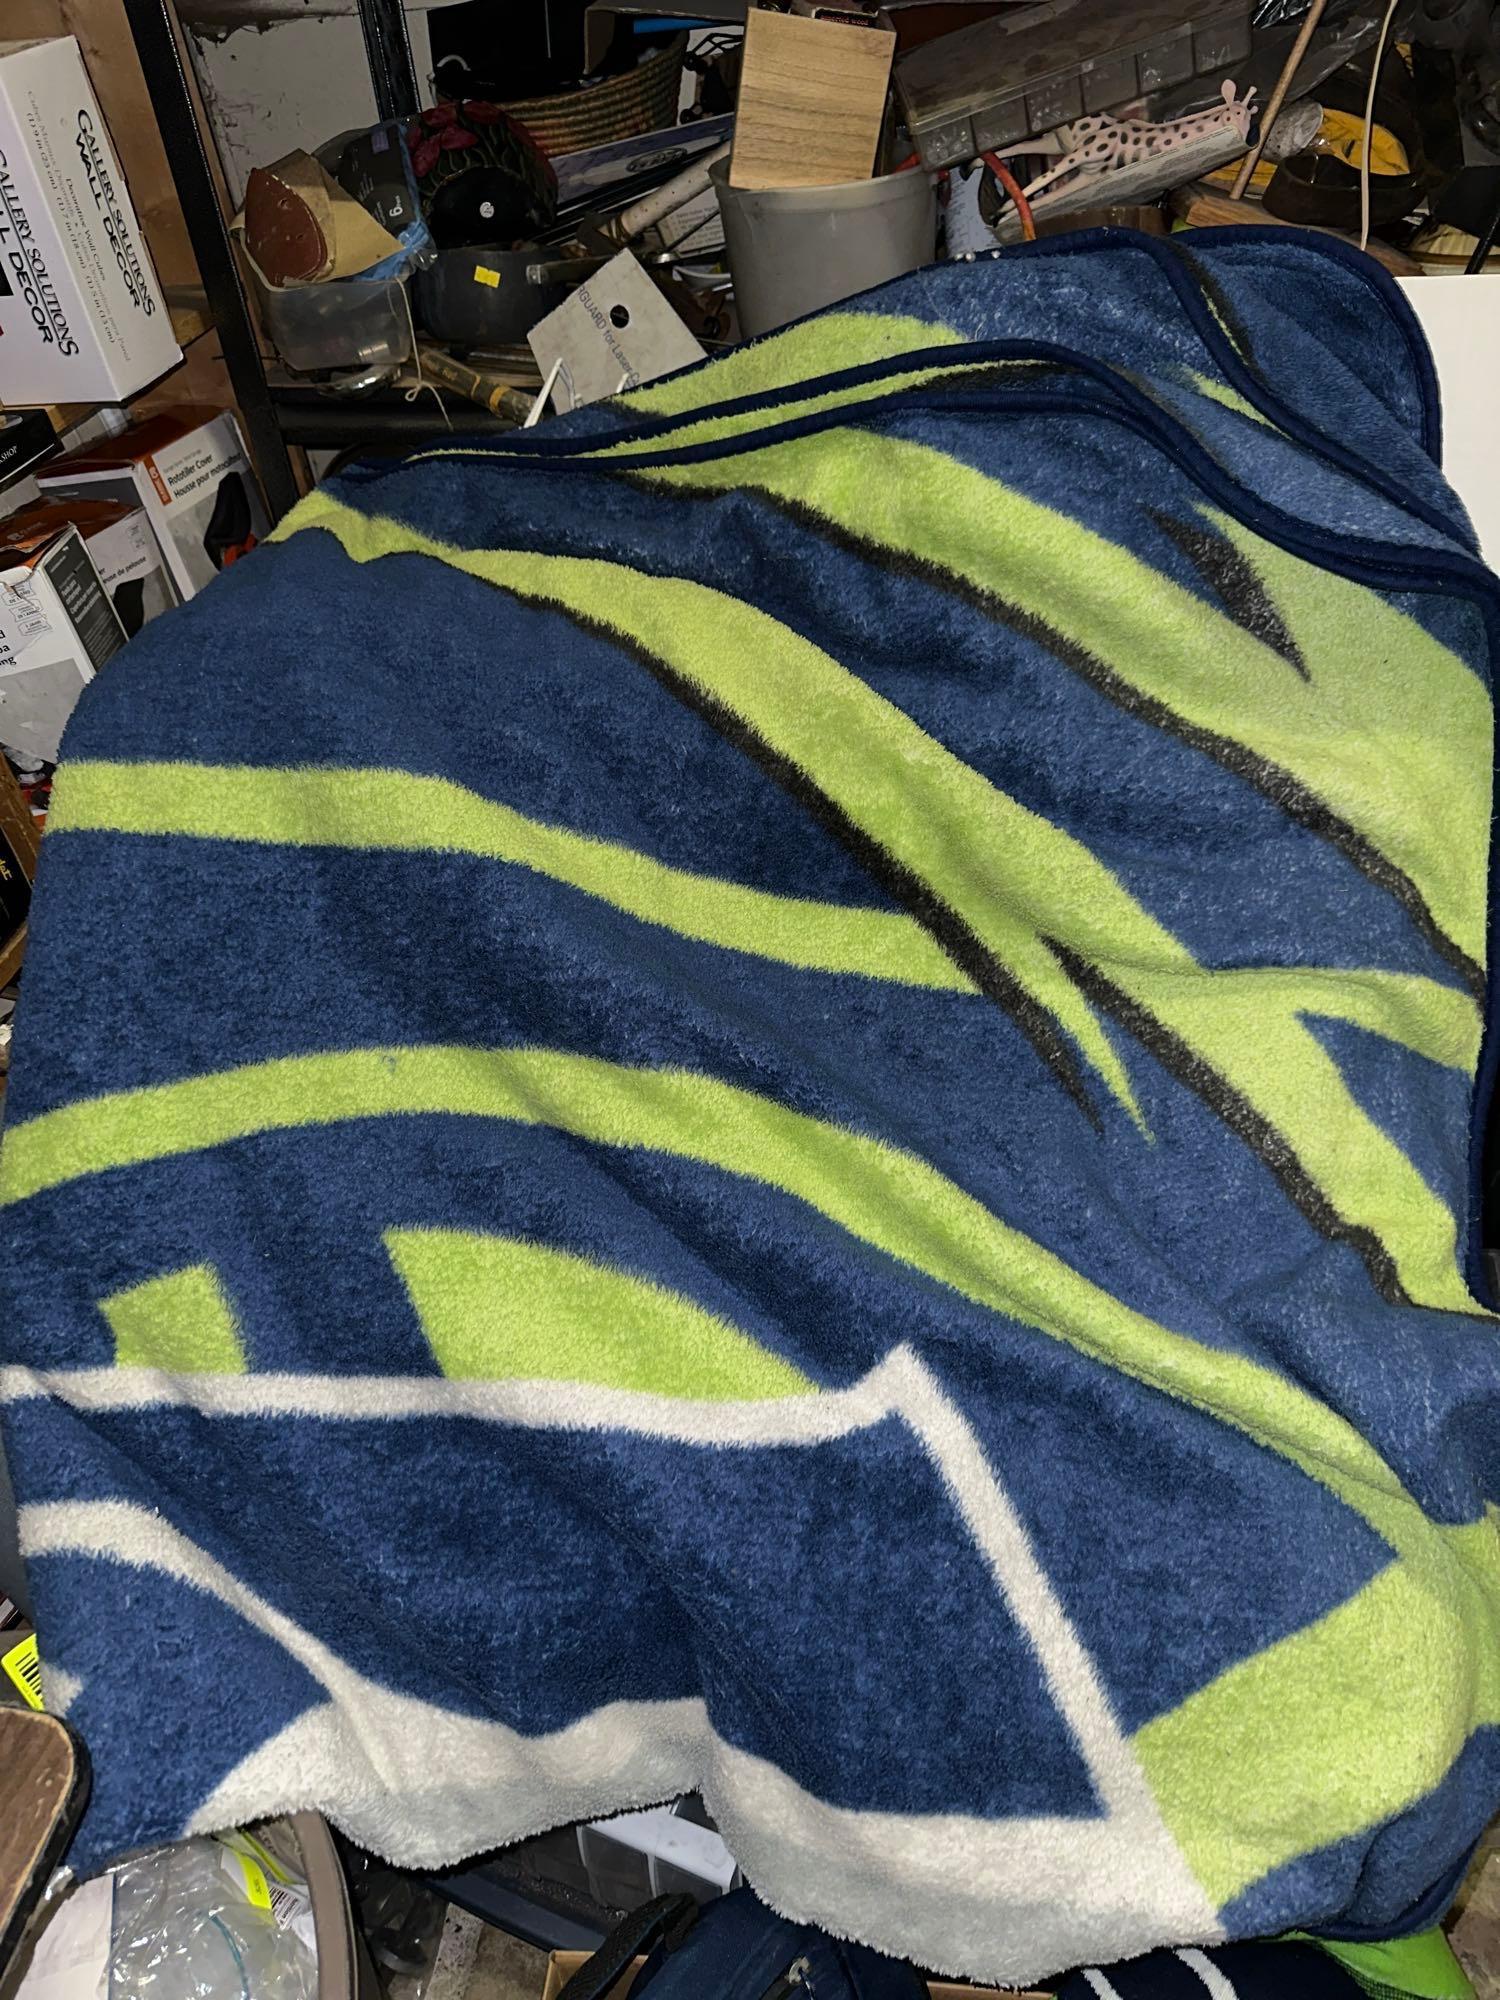 Seahawks Collectibles- Blanket, Sweater, Backpack, Slides and more